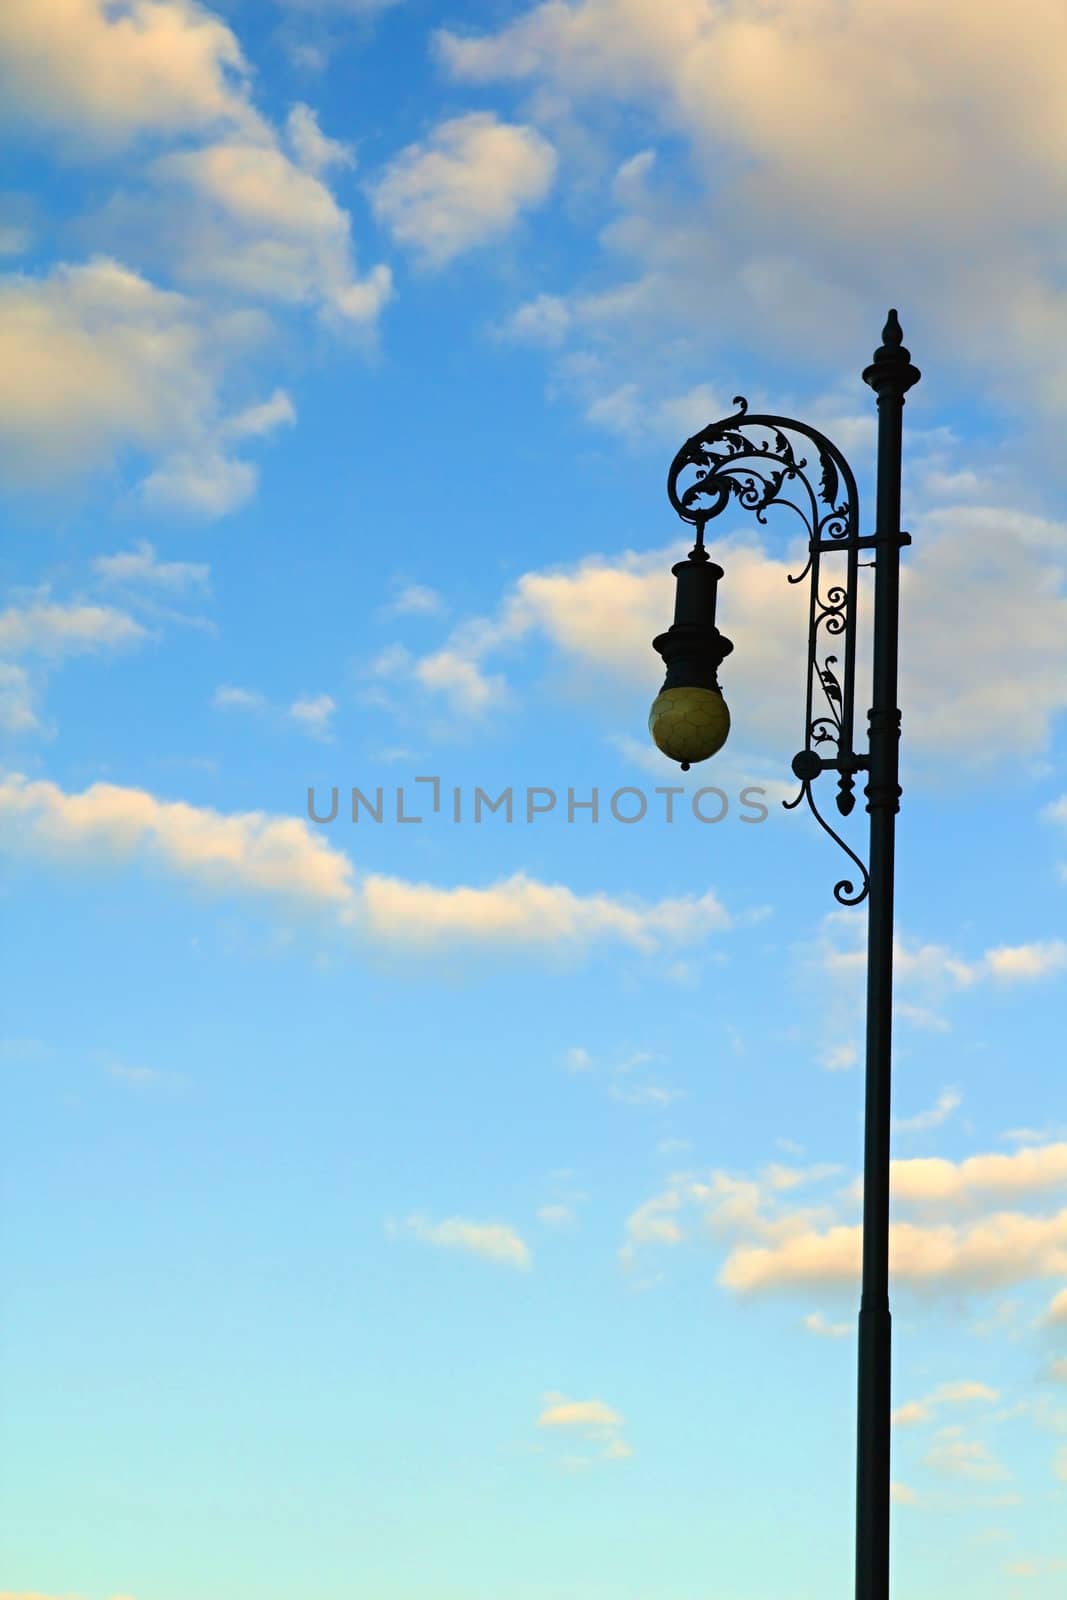 Photo shows detail of street lamp in front of the white clouds and blue sky.